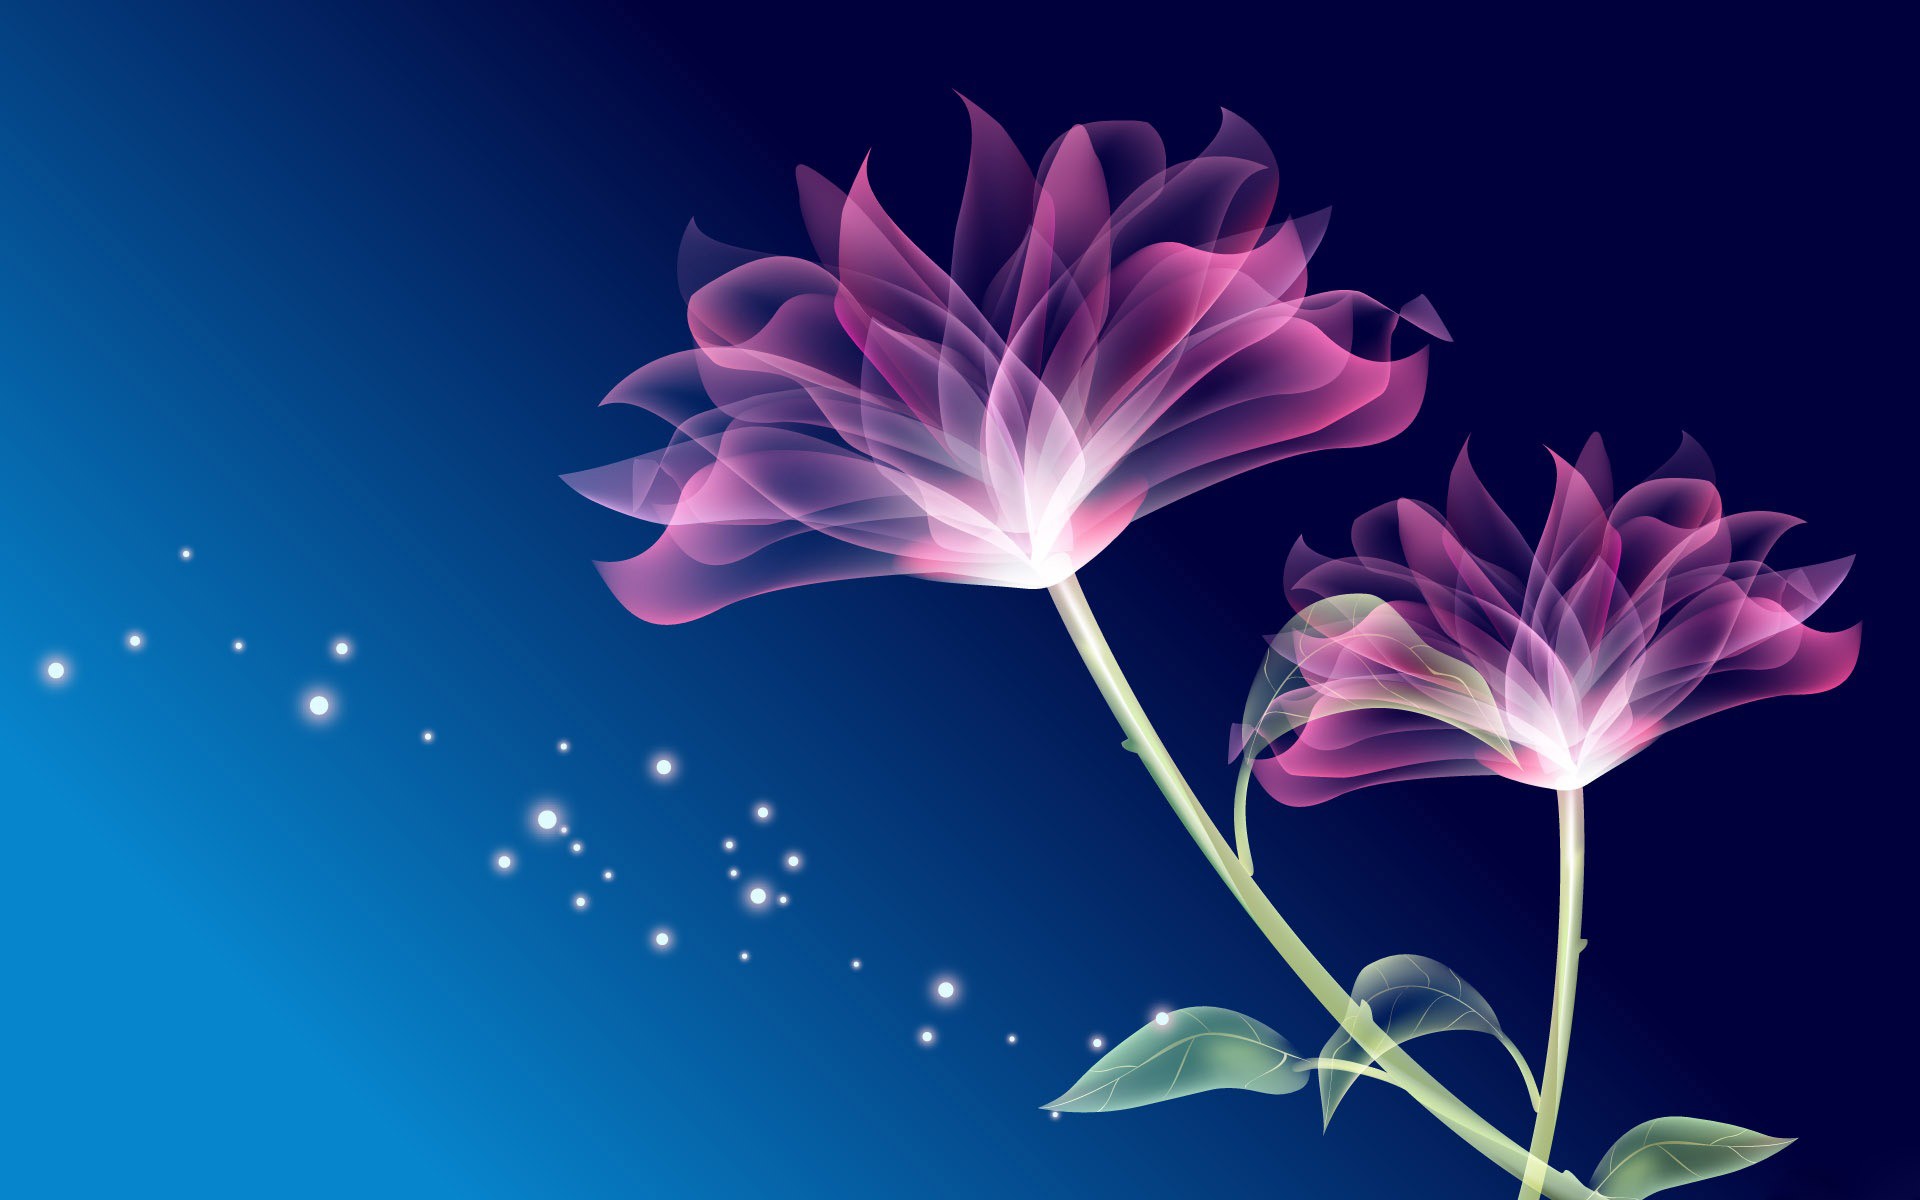 Flower Abstract Best HD Wallpaper Gallery Picture | Wallsev.com ...